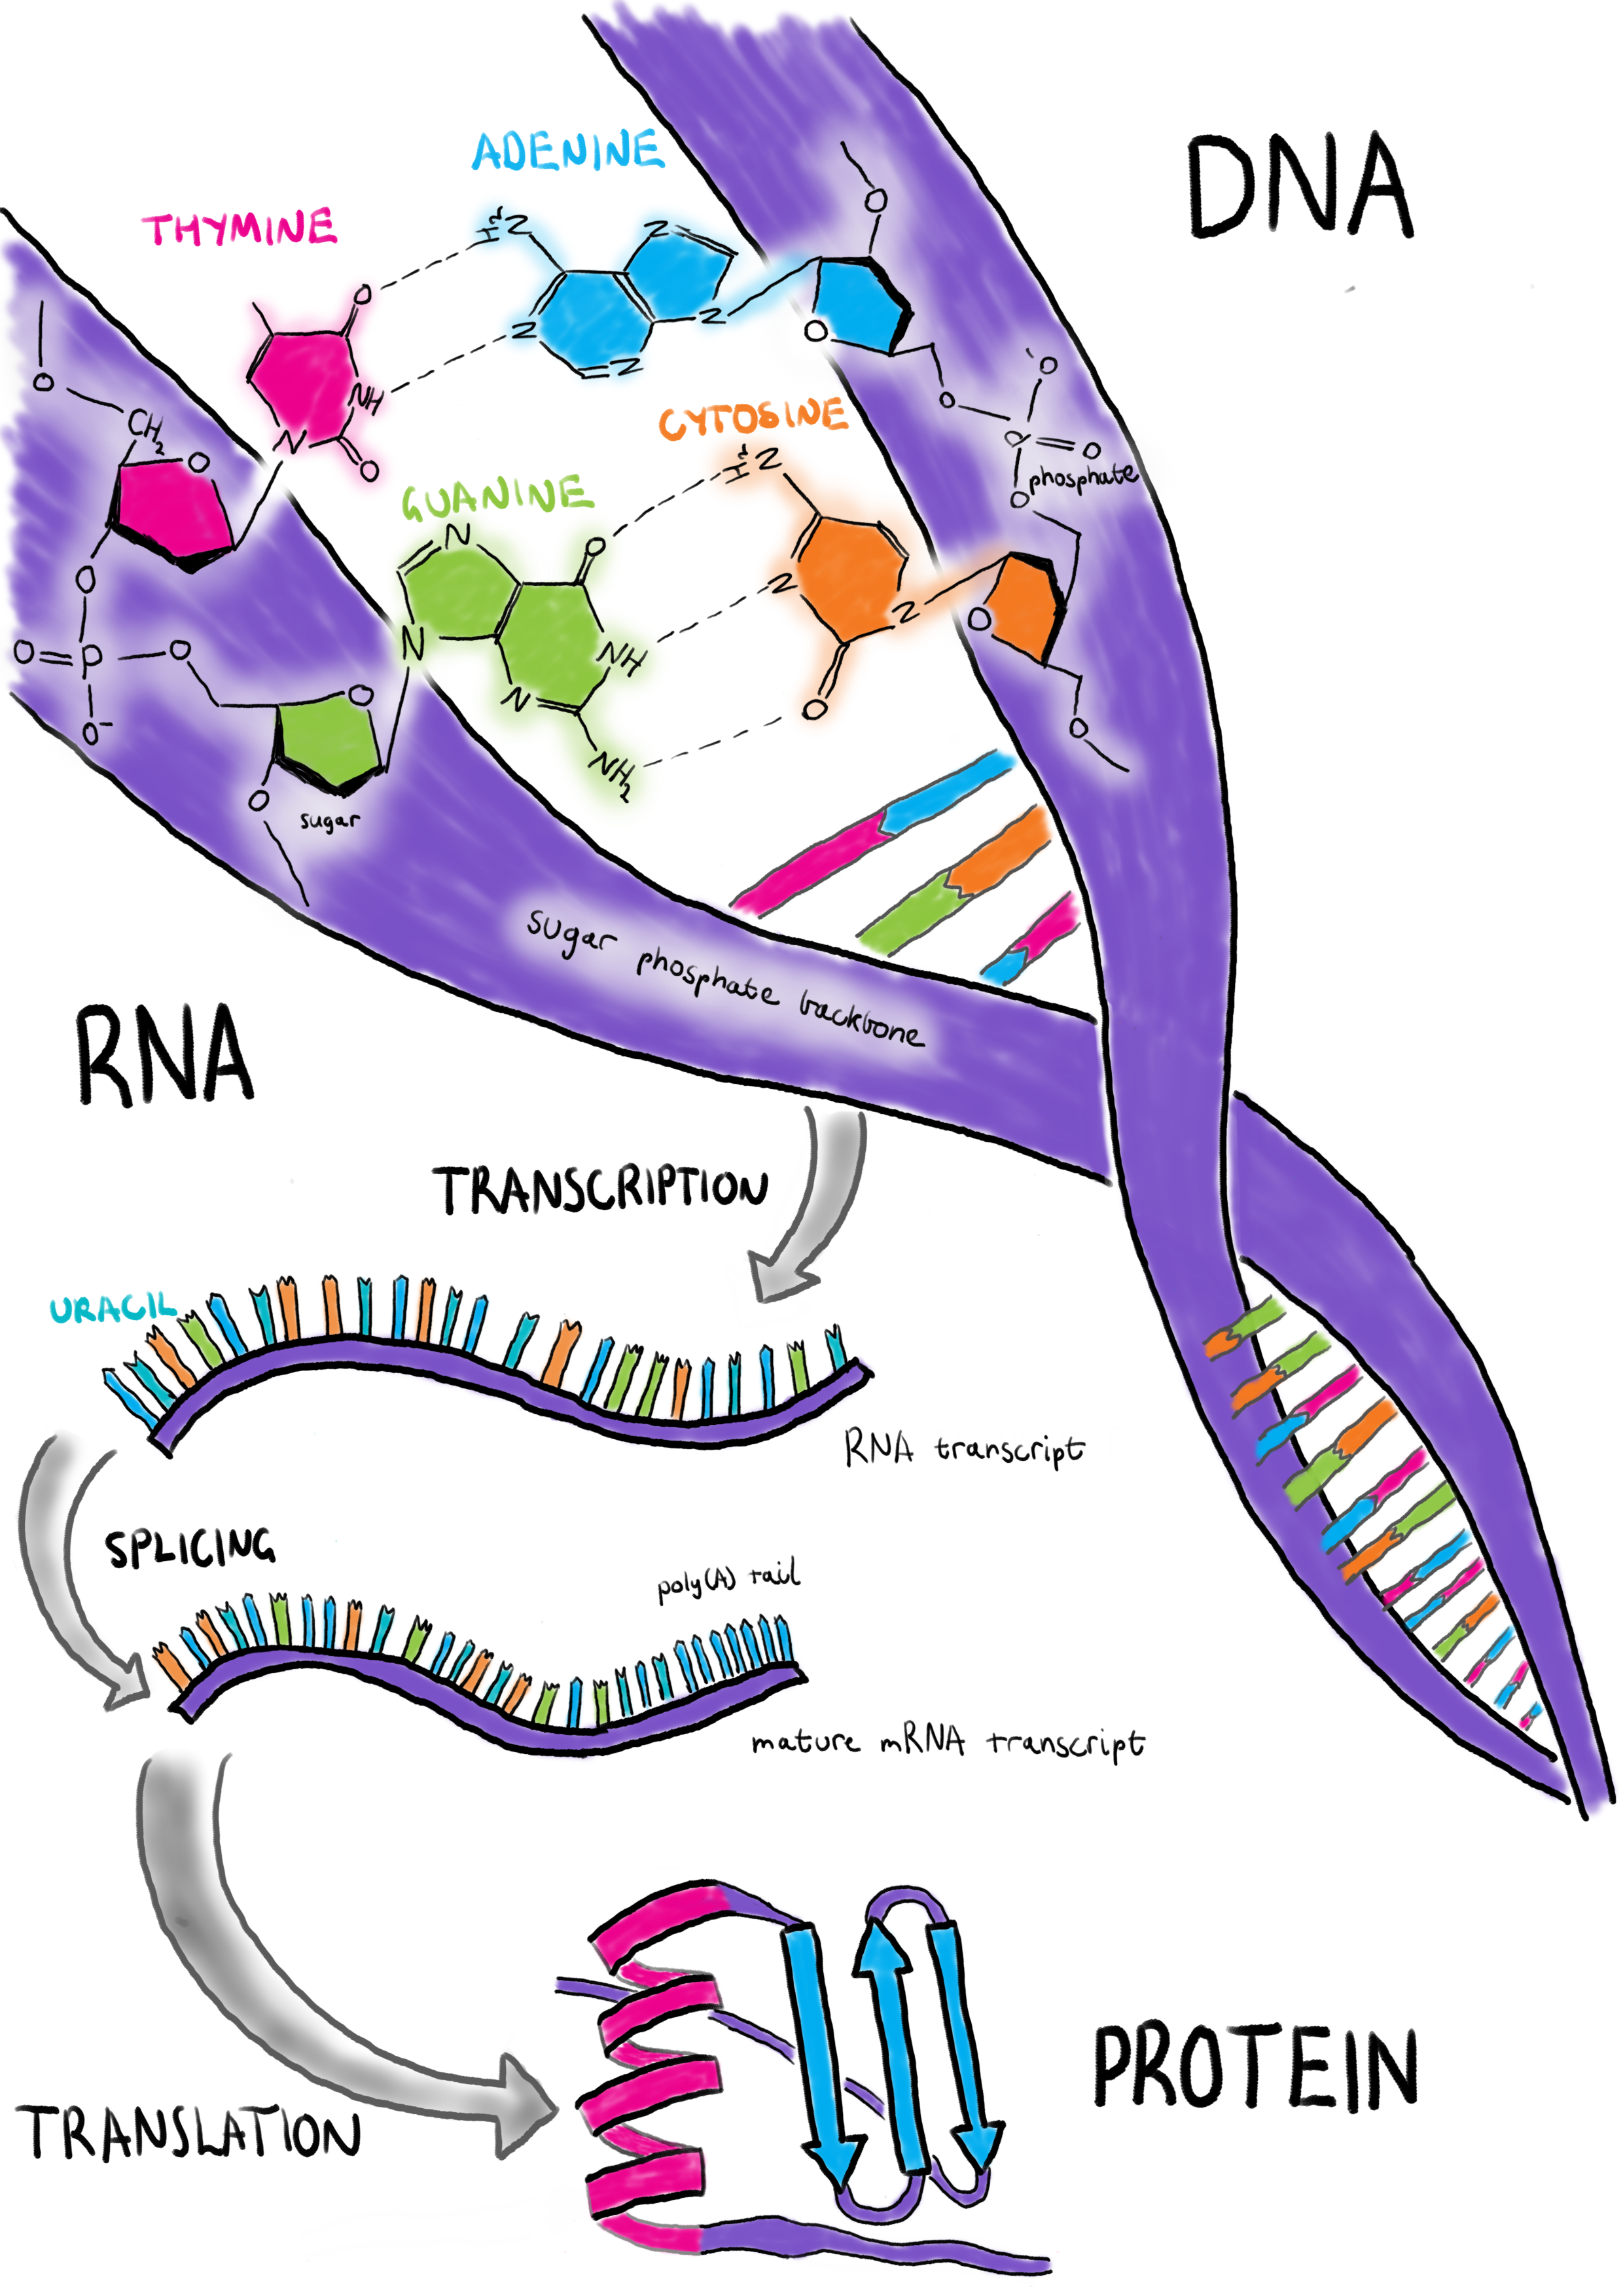 The central dogma of molecular biology. Deoxyribonucleic acid (DNA) is the long-term data storage of the cell. To use this information a ribonucleic acid (RNA) molecule is produced through a process called transcription. A mature messenger RNA (mRNA) requires splicing and addition of a ploy(A) tail. Proteins are created from mRNA through translation in the ribosome.